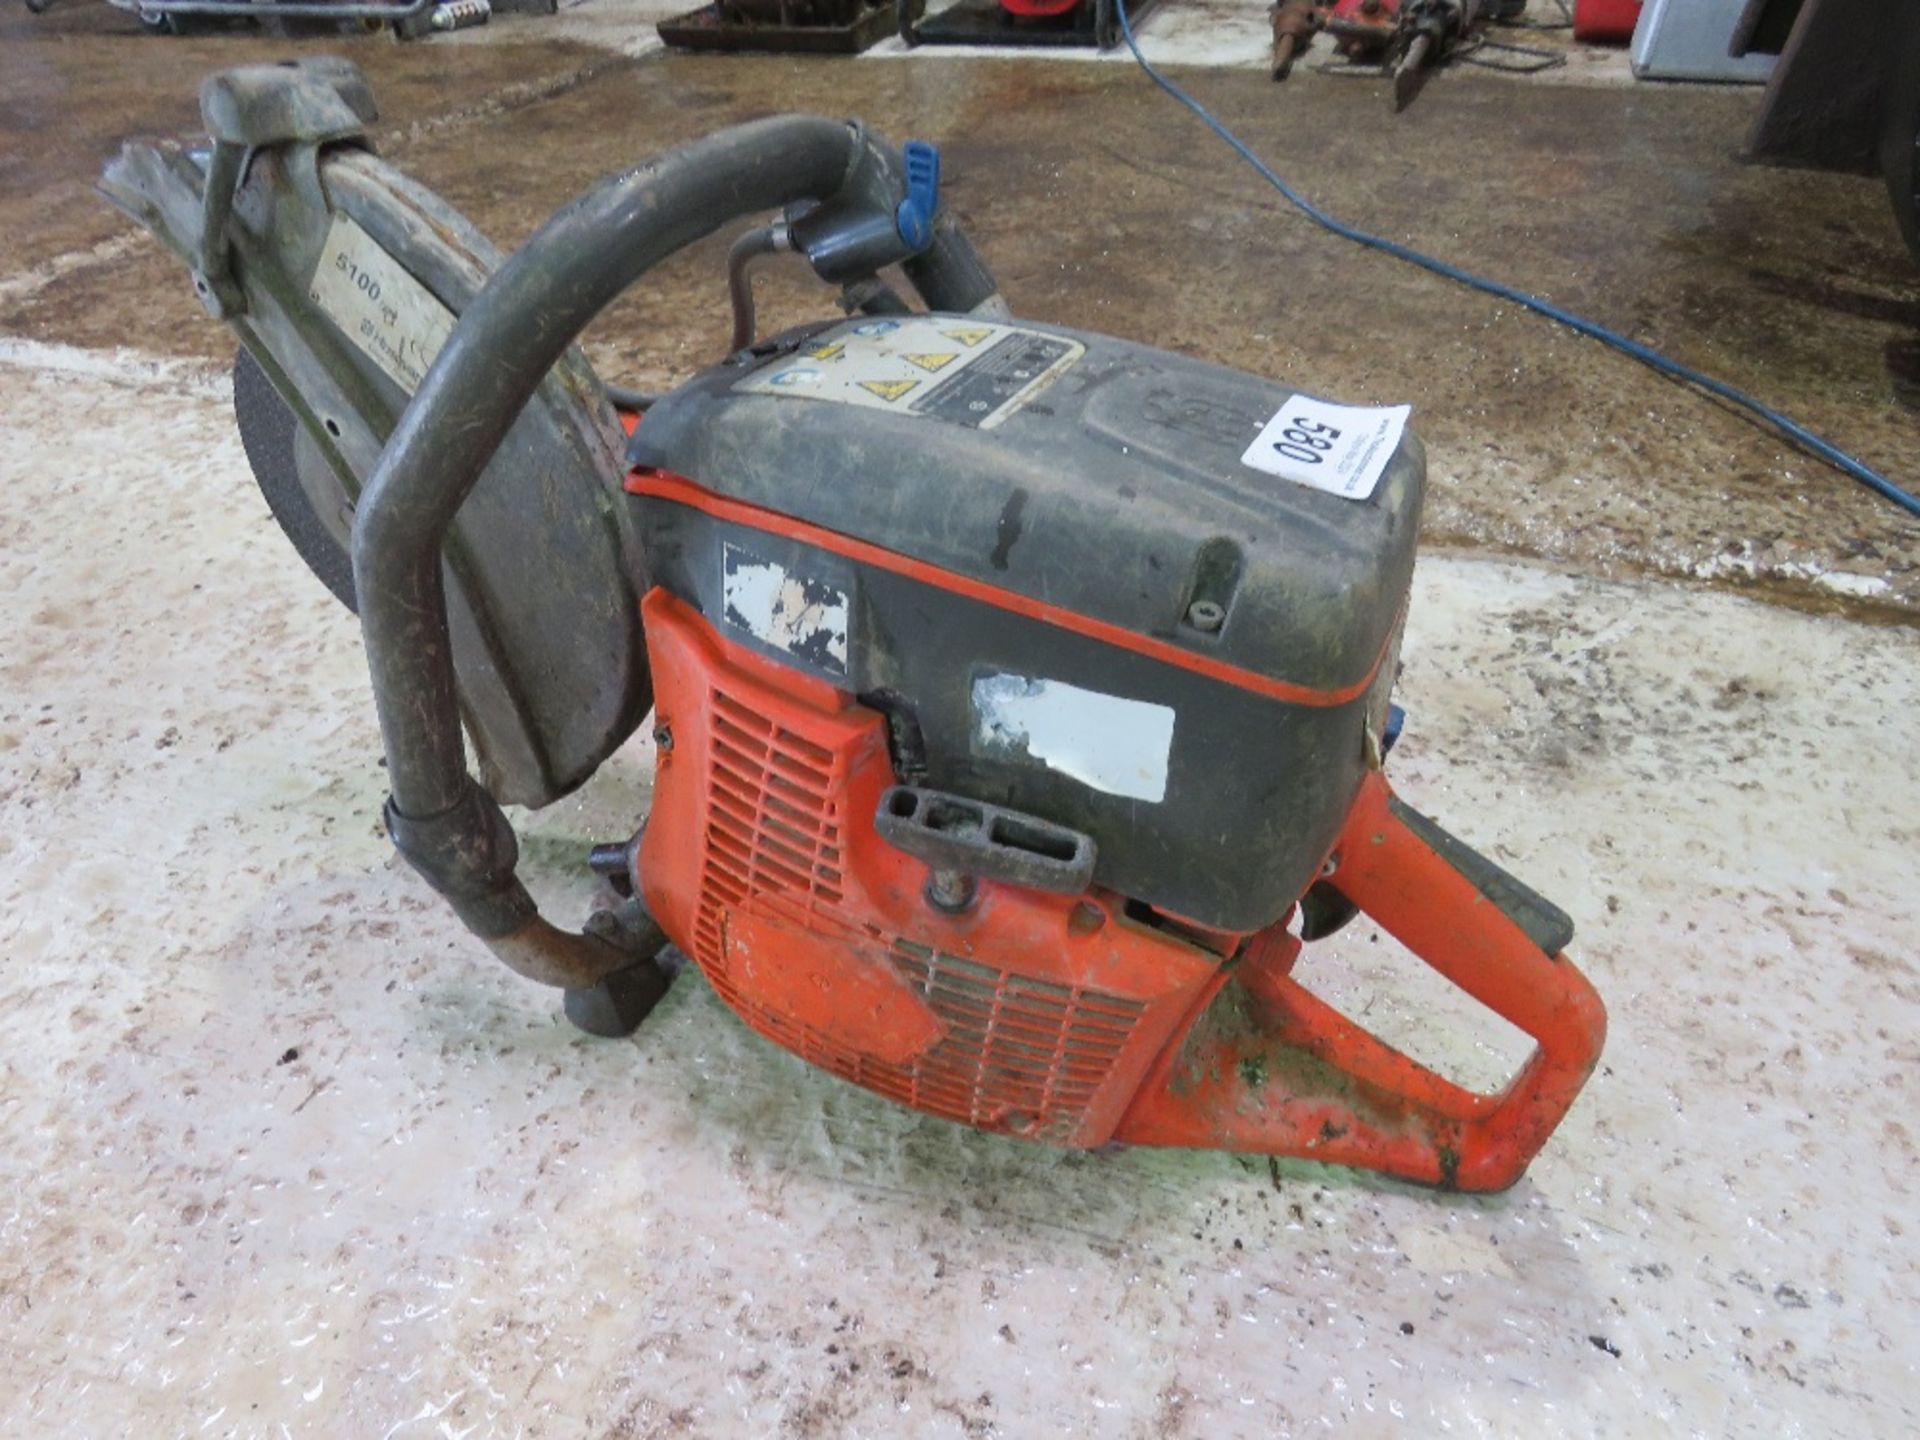 HUSQVARNA PETROL ENGINED CUT OFF SAW....THIS LOT IS SOLD UNDER THE AUCTIONEERS MARGIN SCHEME, THEREF - Image 3 of 3